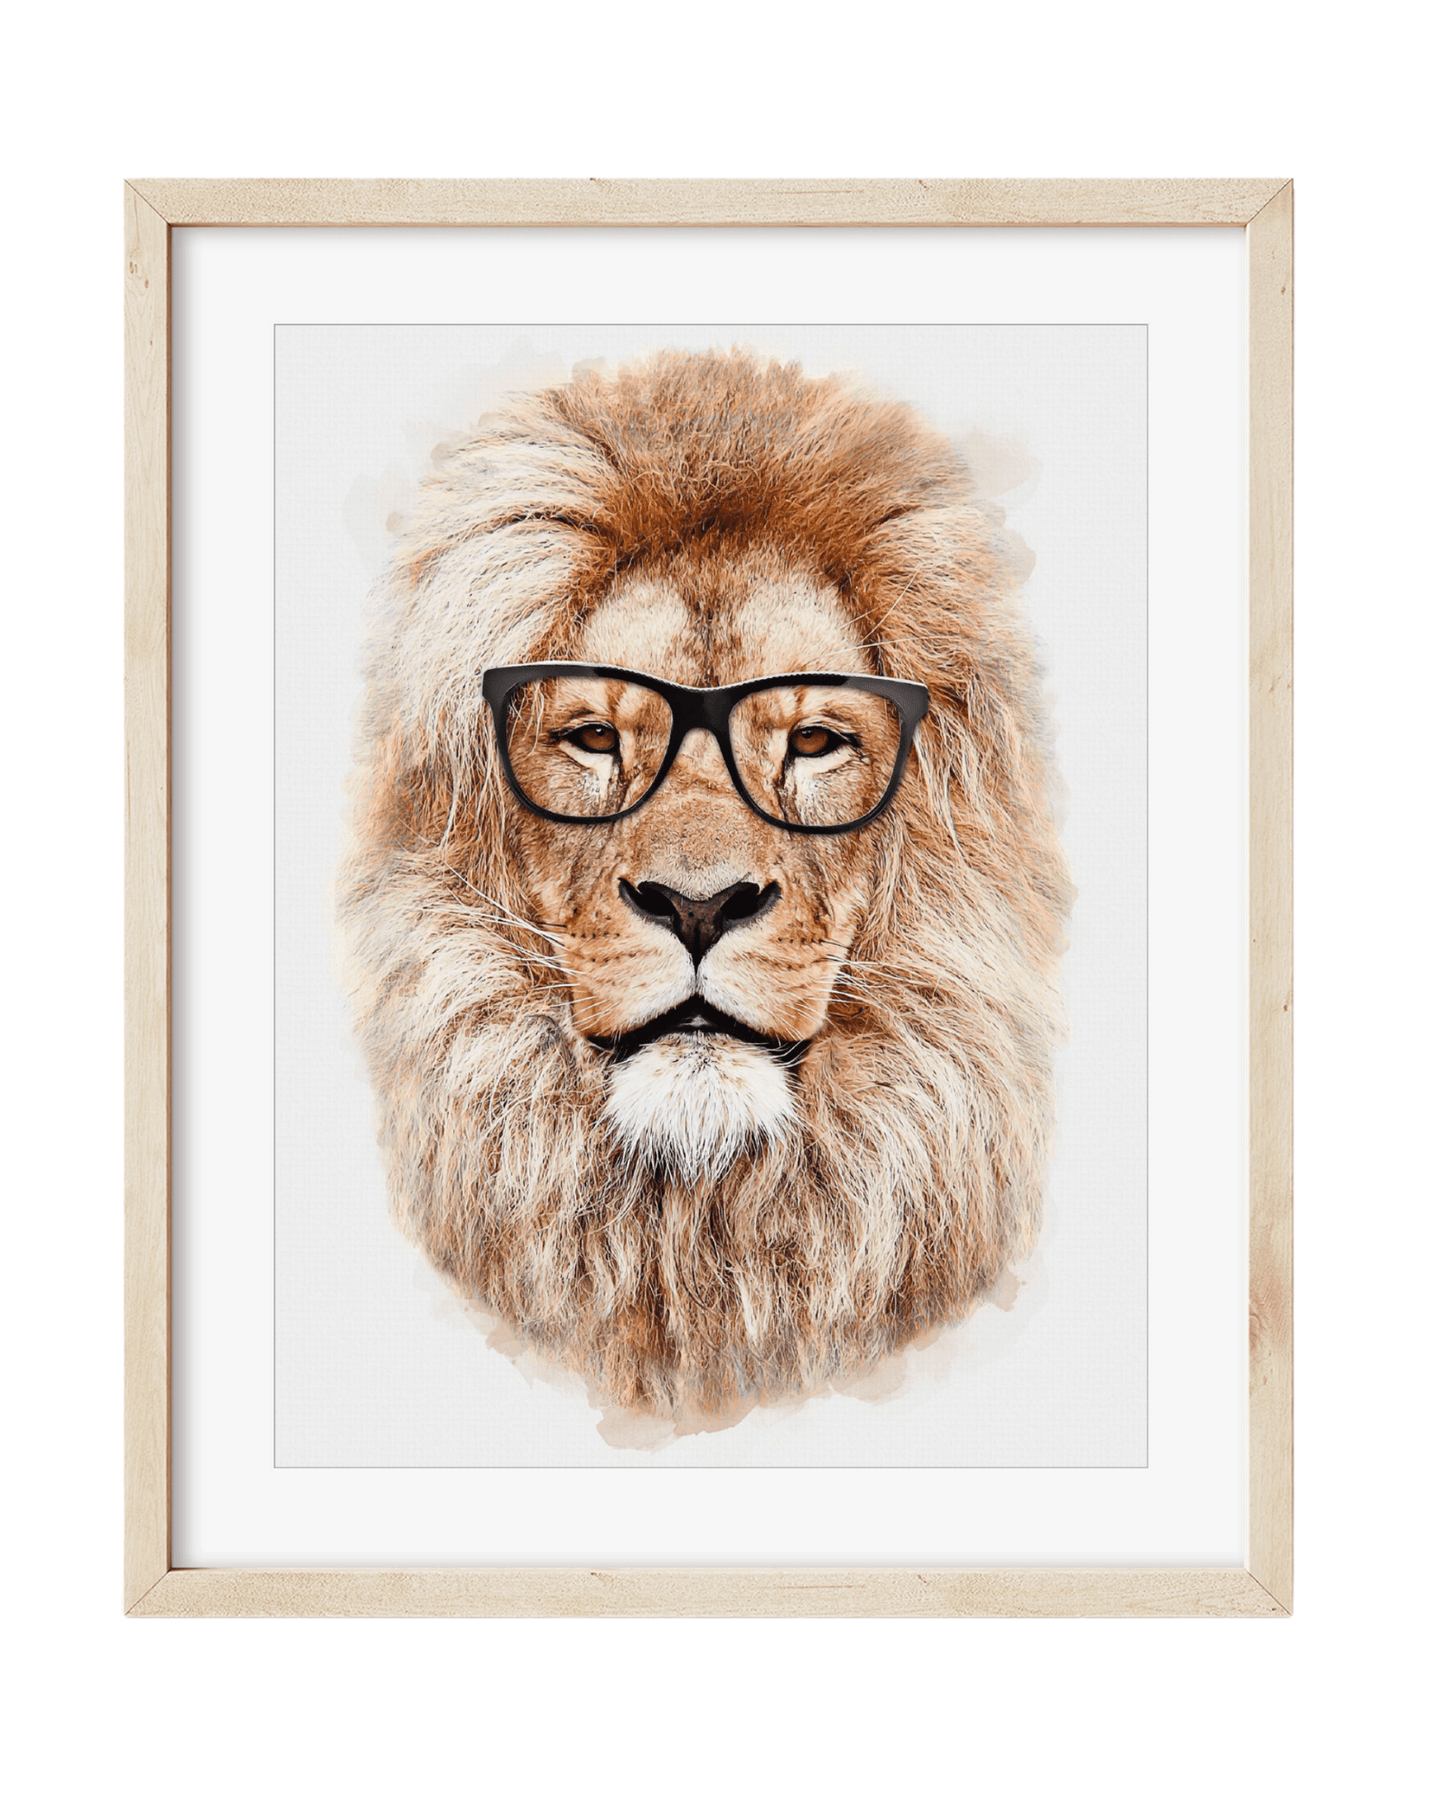 Mr. Lion | Lion With Glasses Print - PRINT - Fable and Fawn 